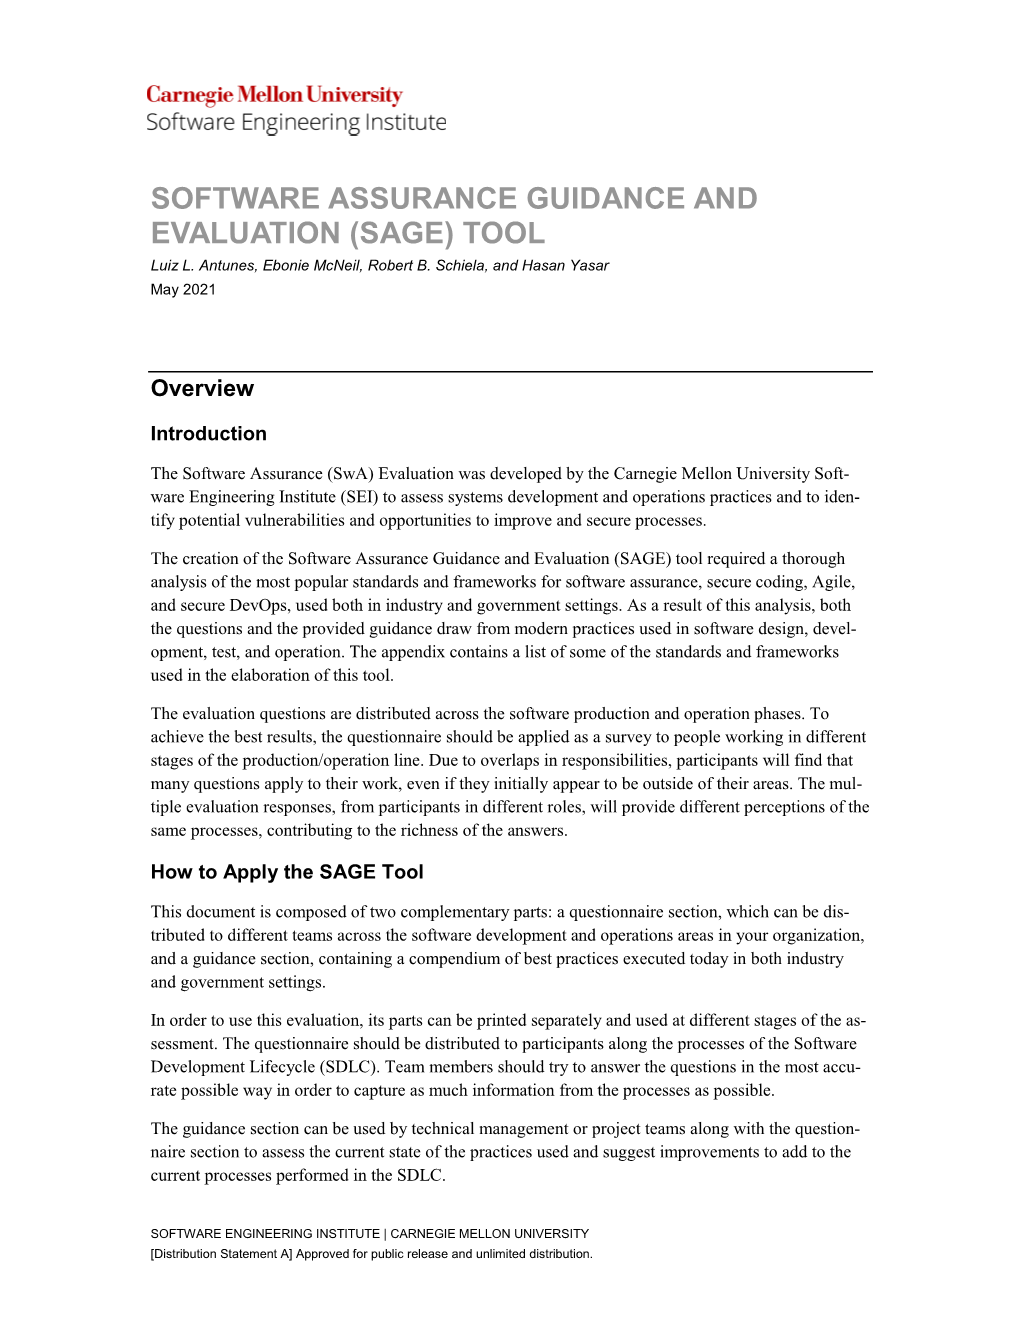 SOFTWARE ASSURANCE GUIDANCE and EVALUATION (SAGE) TOOL Luiz L